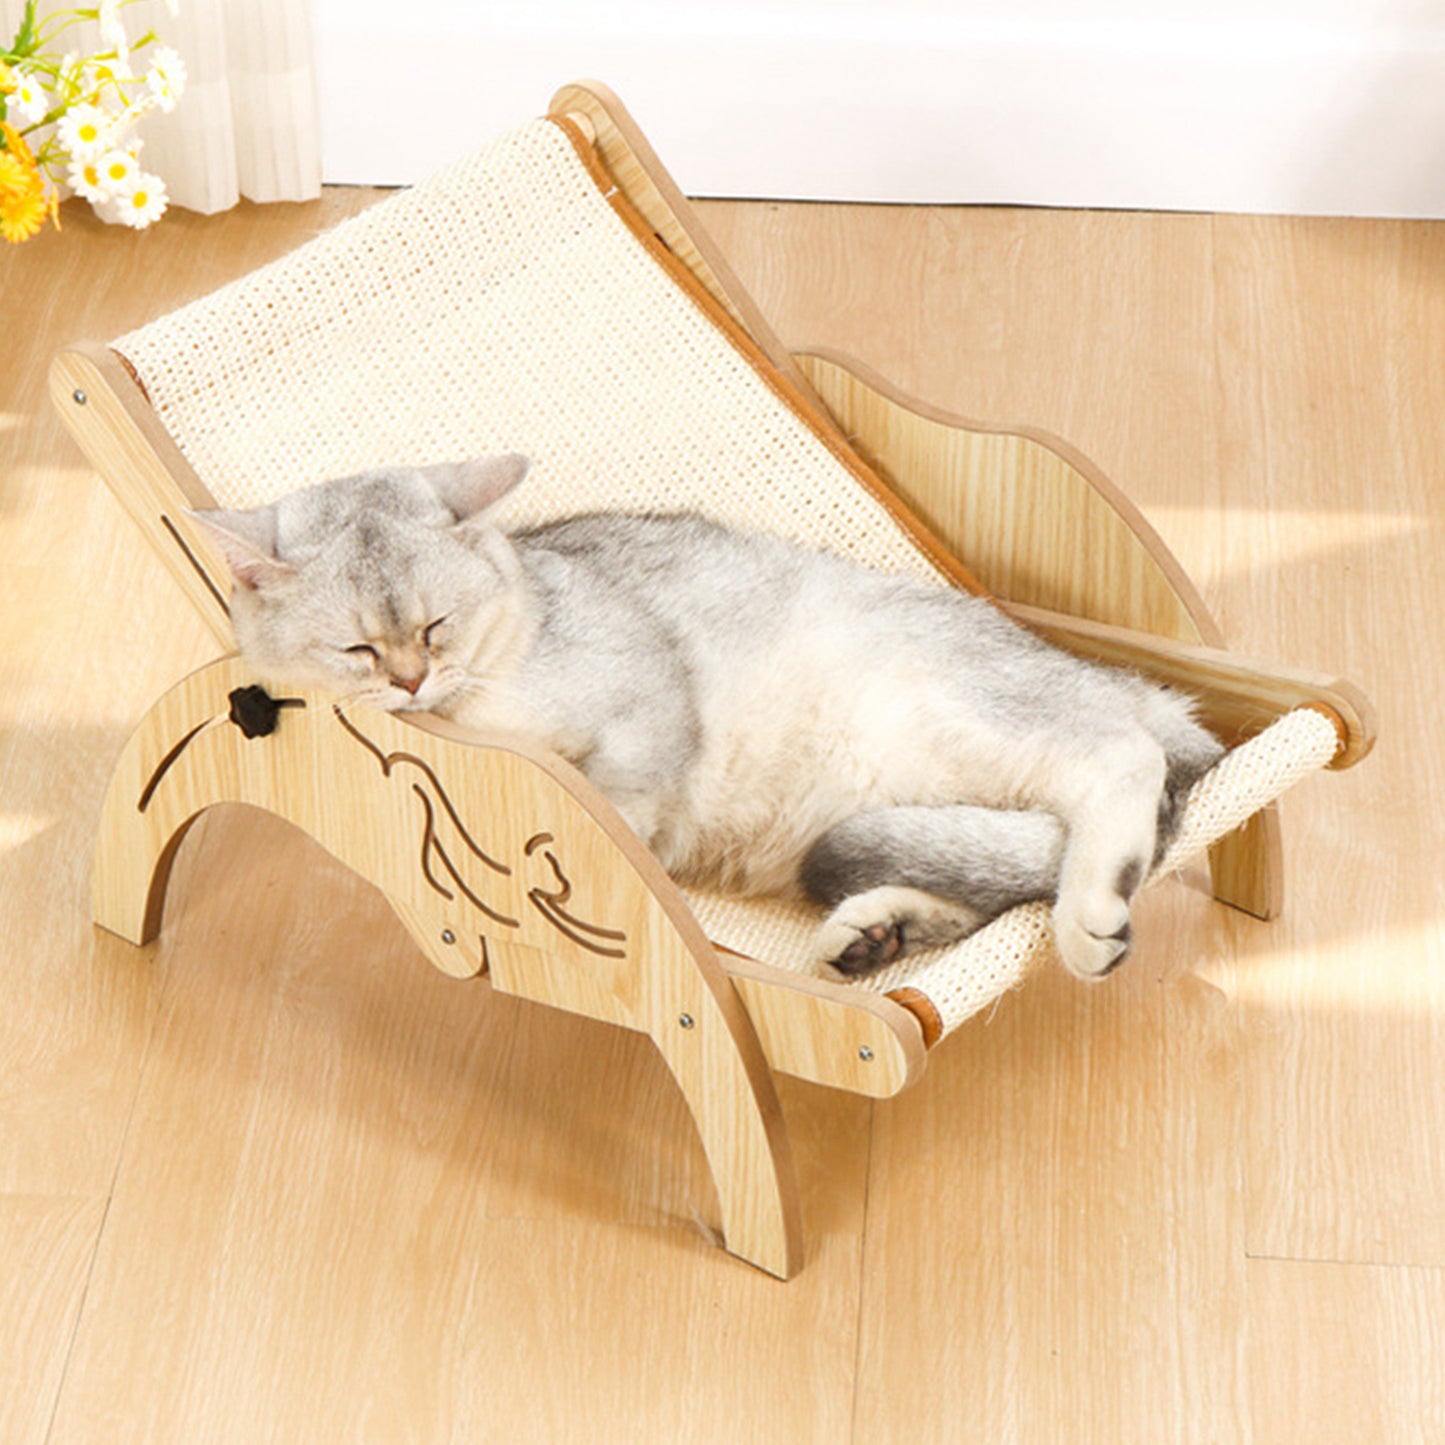 Cat Hammock Lounge Bed Chair